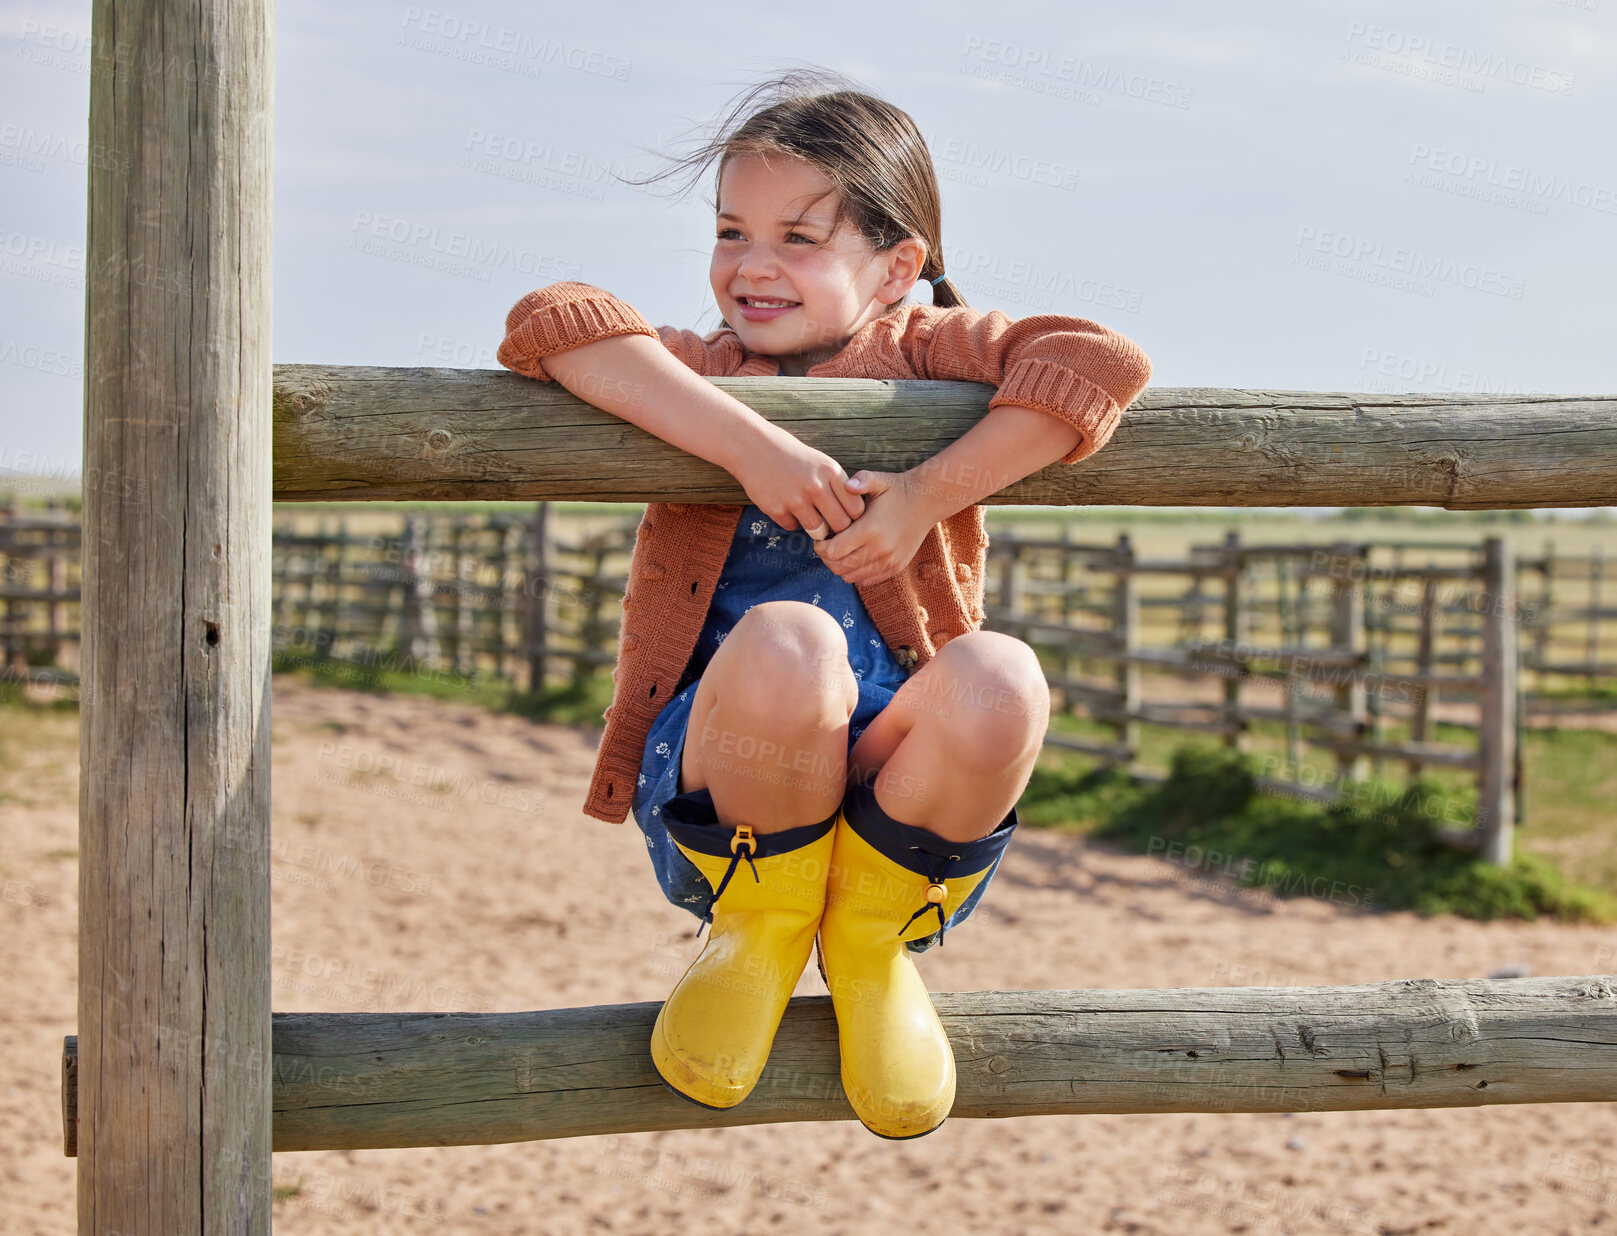 Buy stock photo Shot of an adorable little girl playing outside on the farm